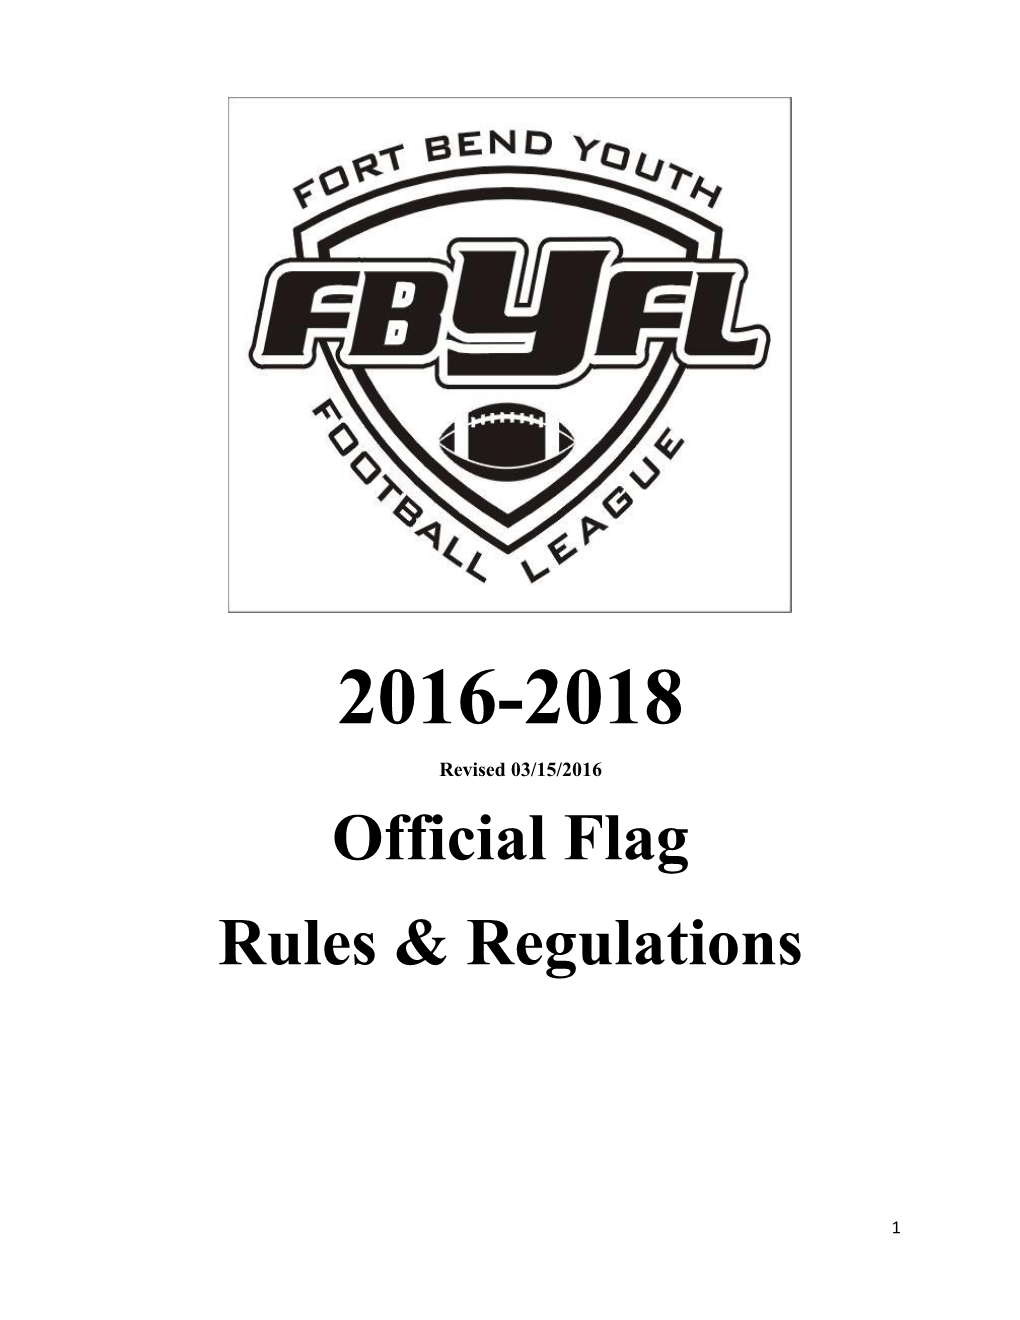 Official Flag Rules & Regulations